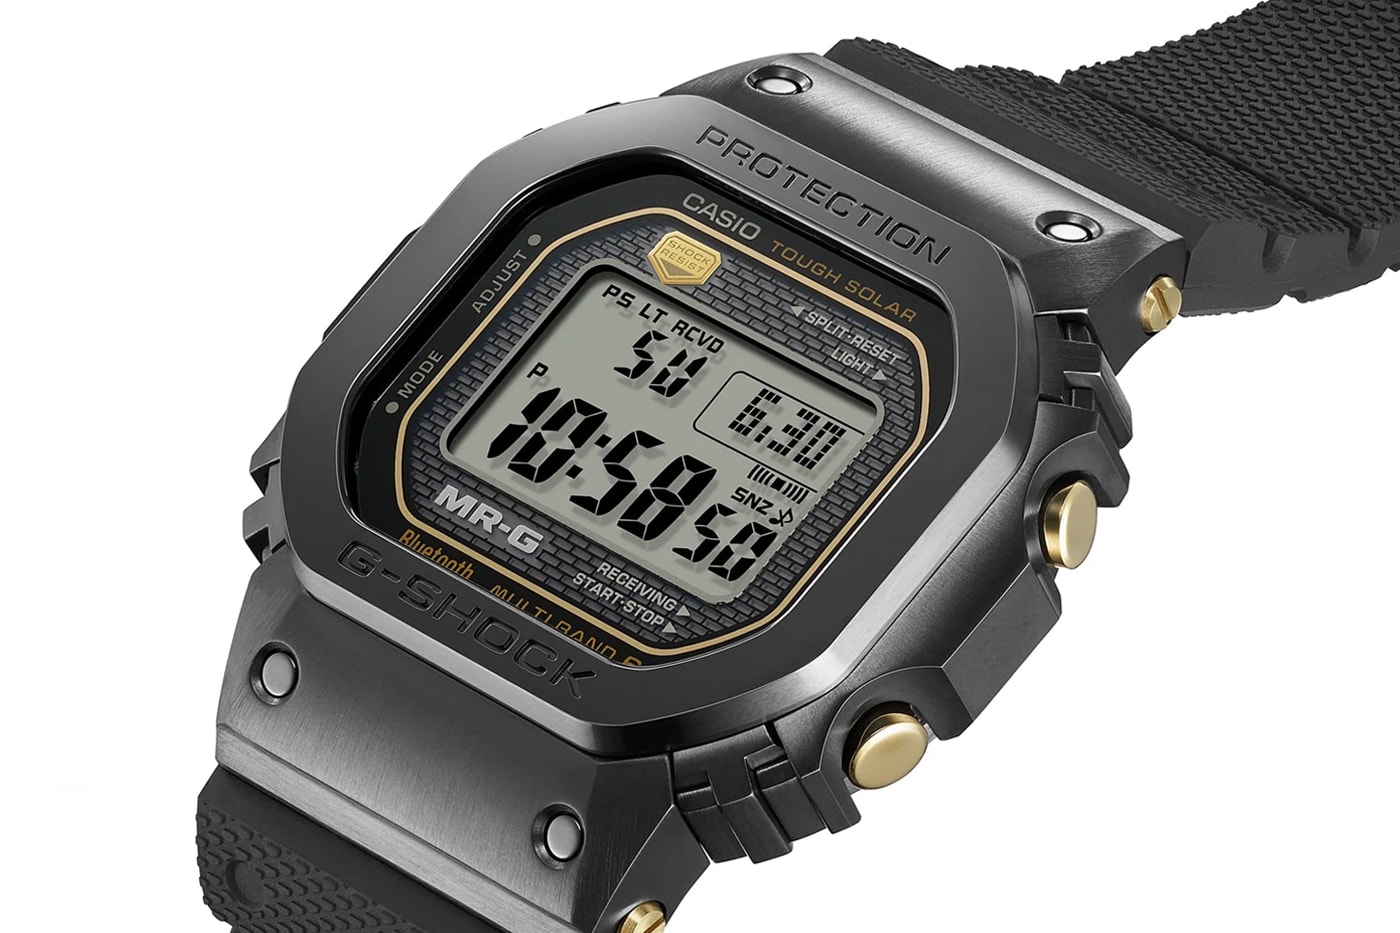 G-SHOCK MRGB5000 watch silhouette classic iconic timeless model bezel features digital interface shape price buy online now